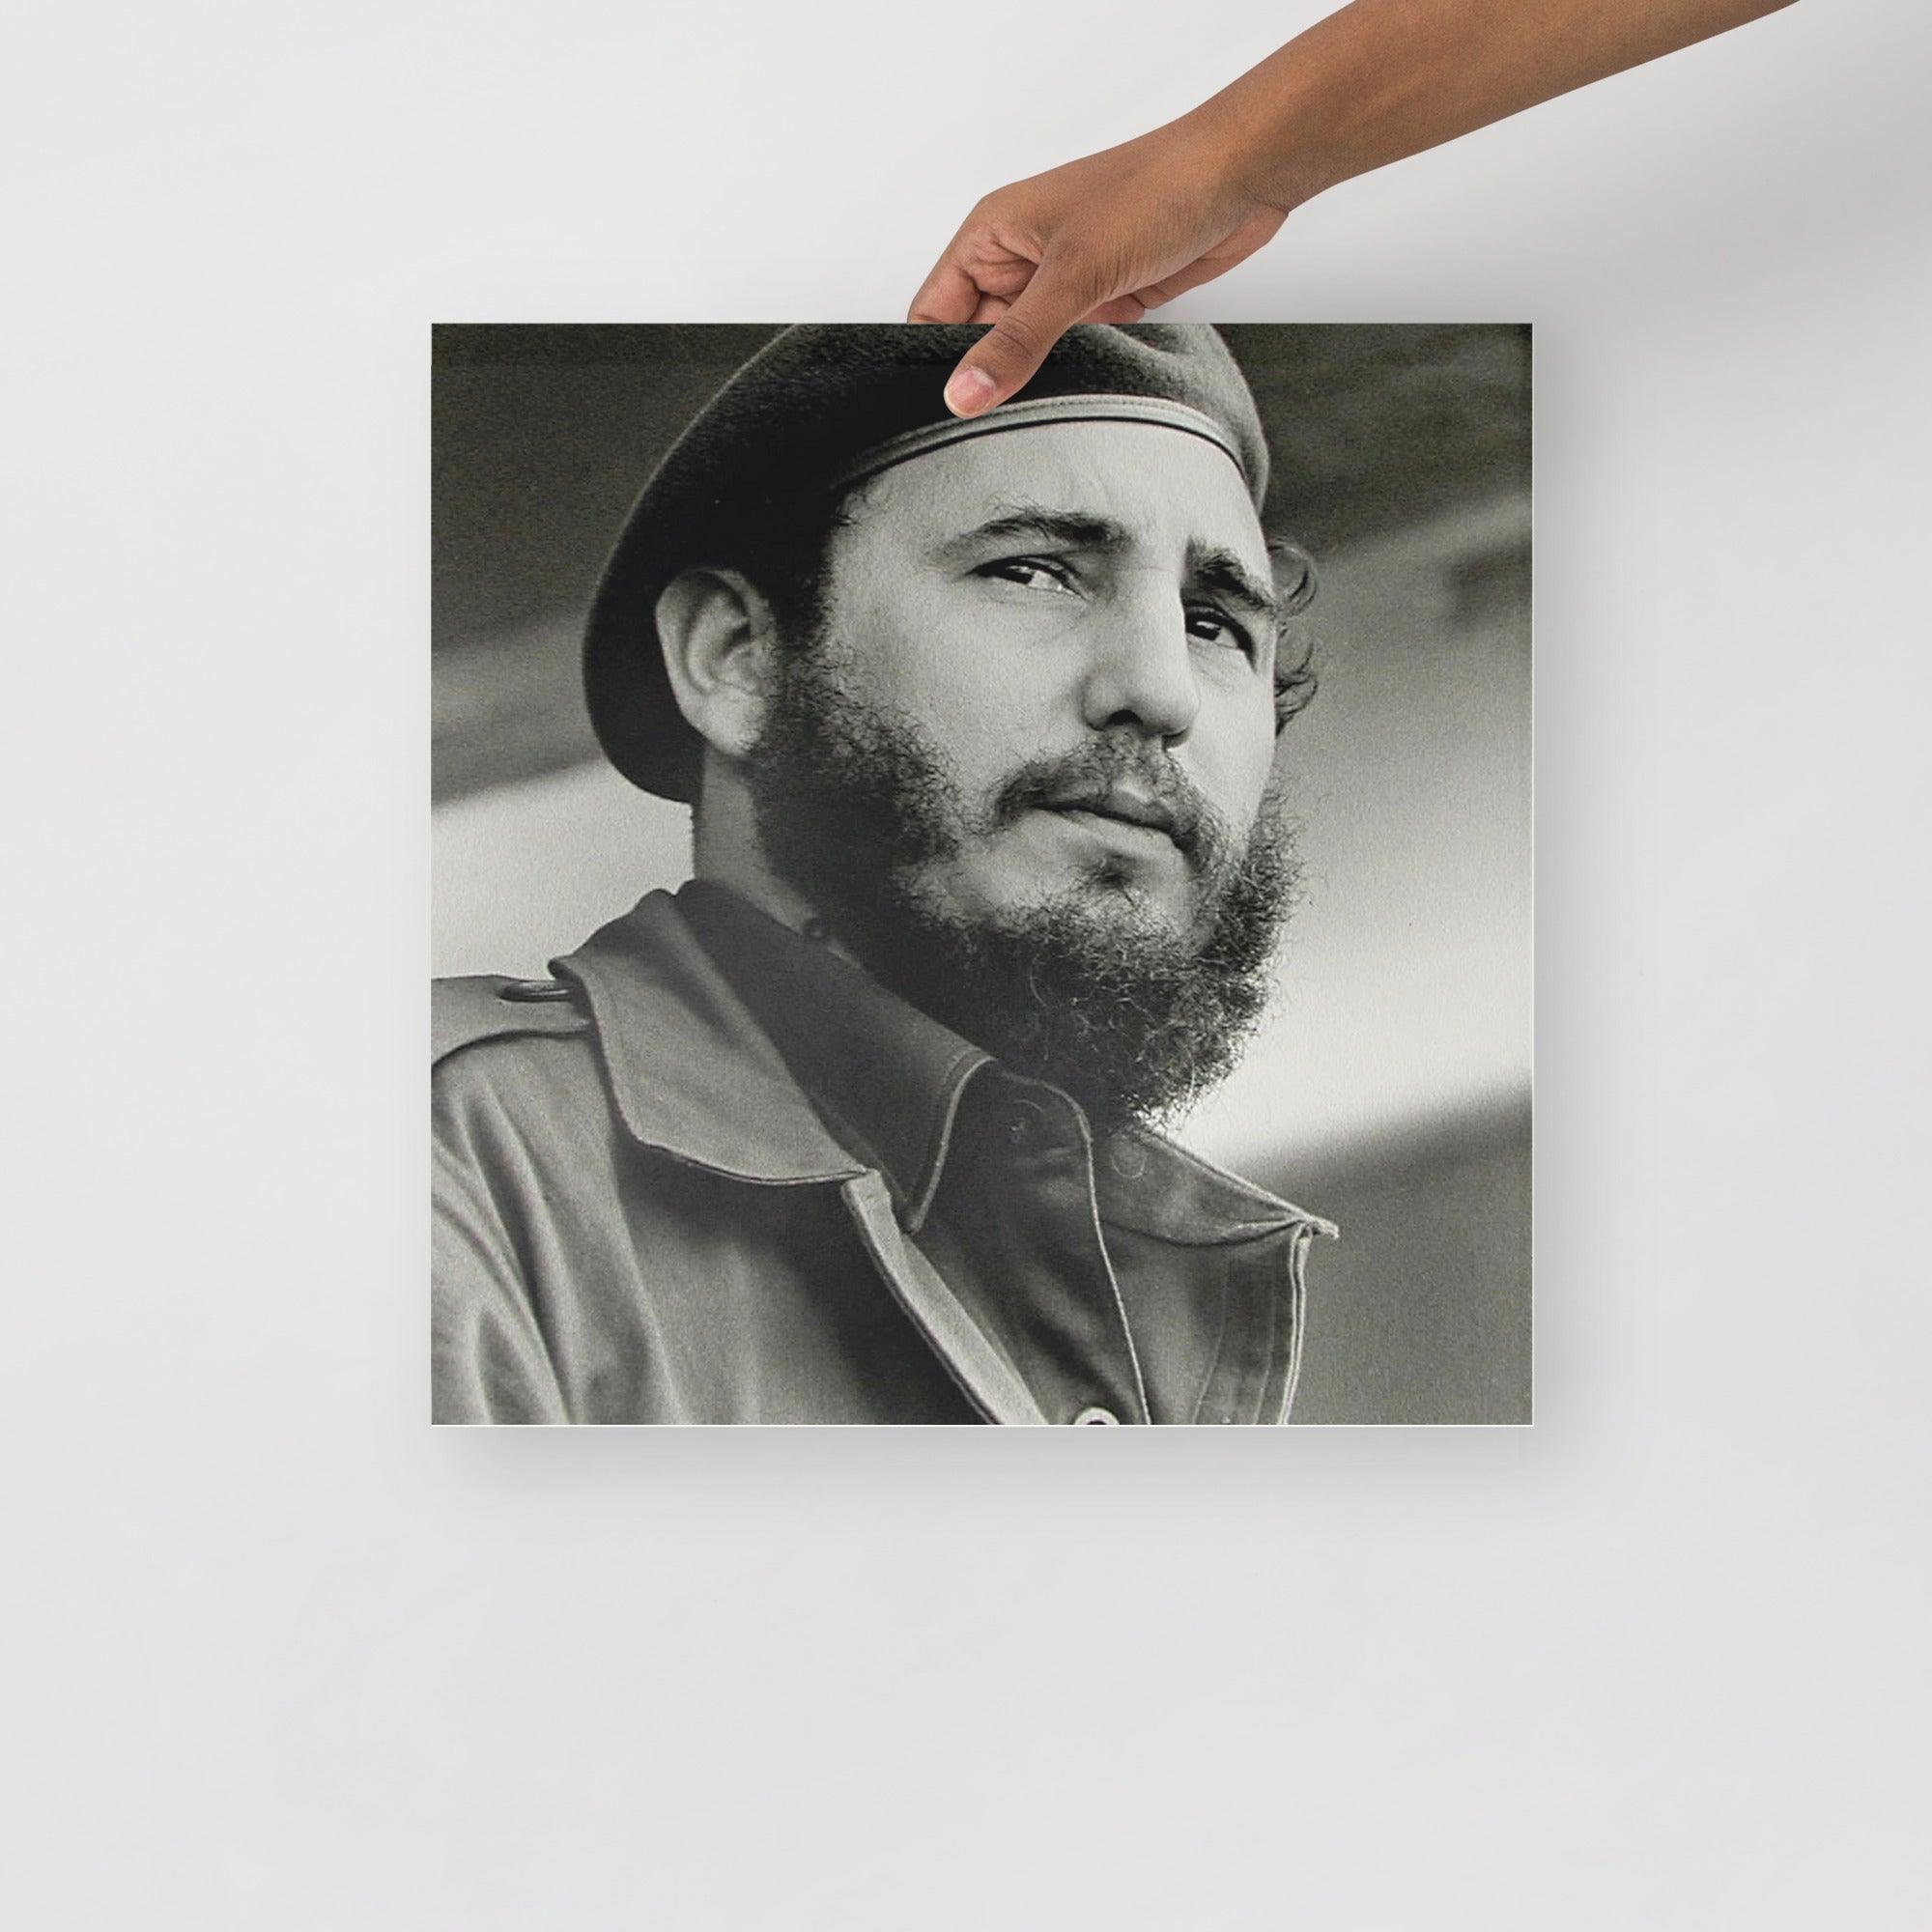 A Fidel Castro poster on a plain backdrop in size 16x16”.